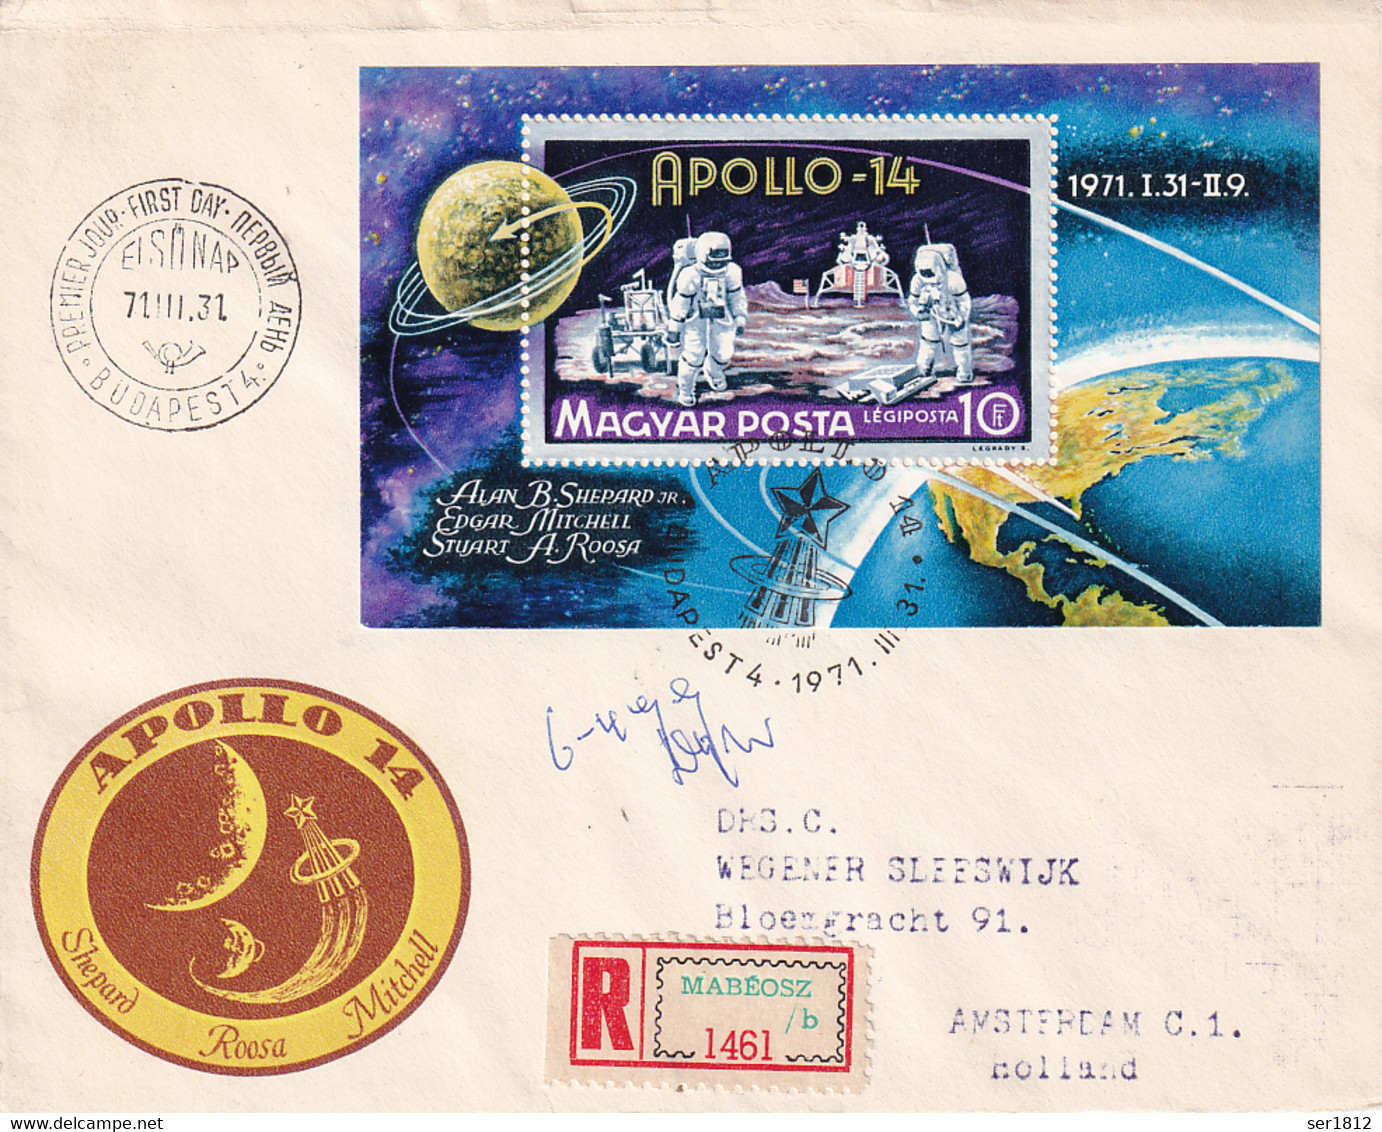 Hungary  Magyar 1971 FDC Space Cover Apollo 14  First Vehicle On The Moon - Covers & Documents